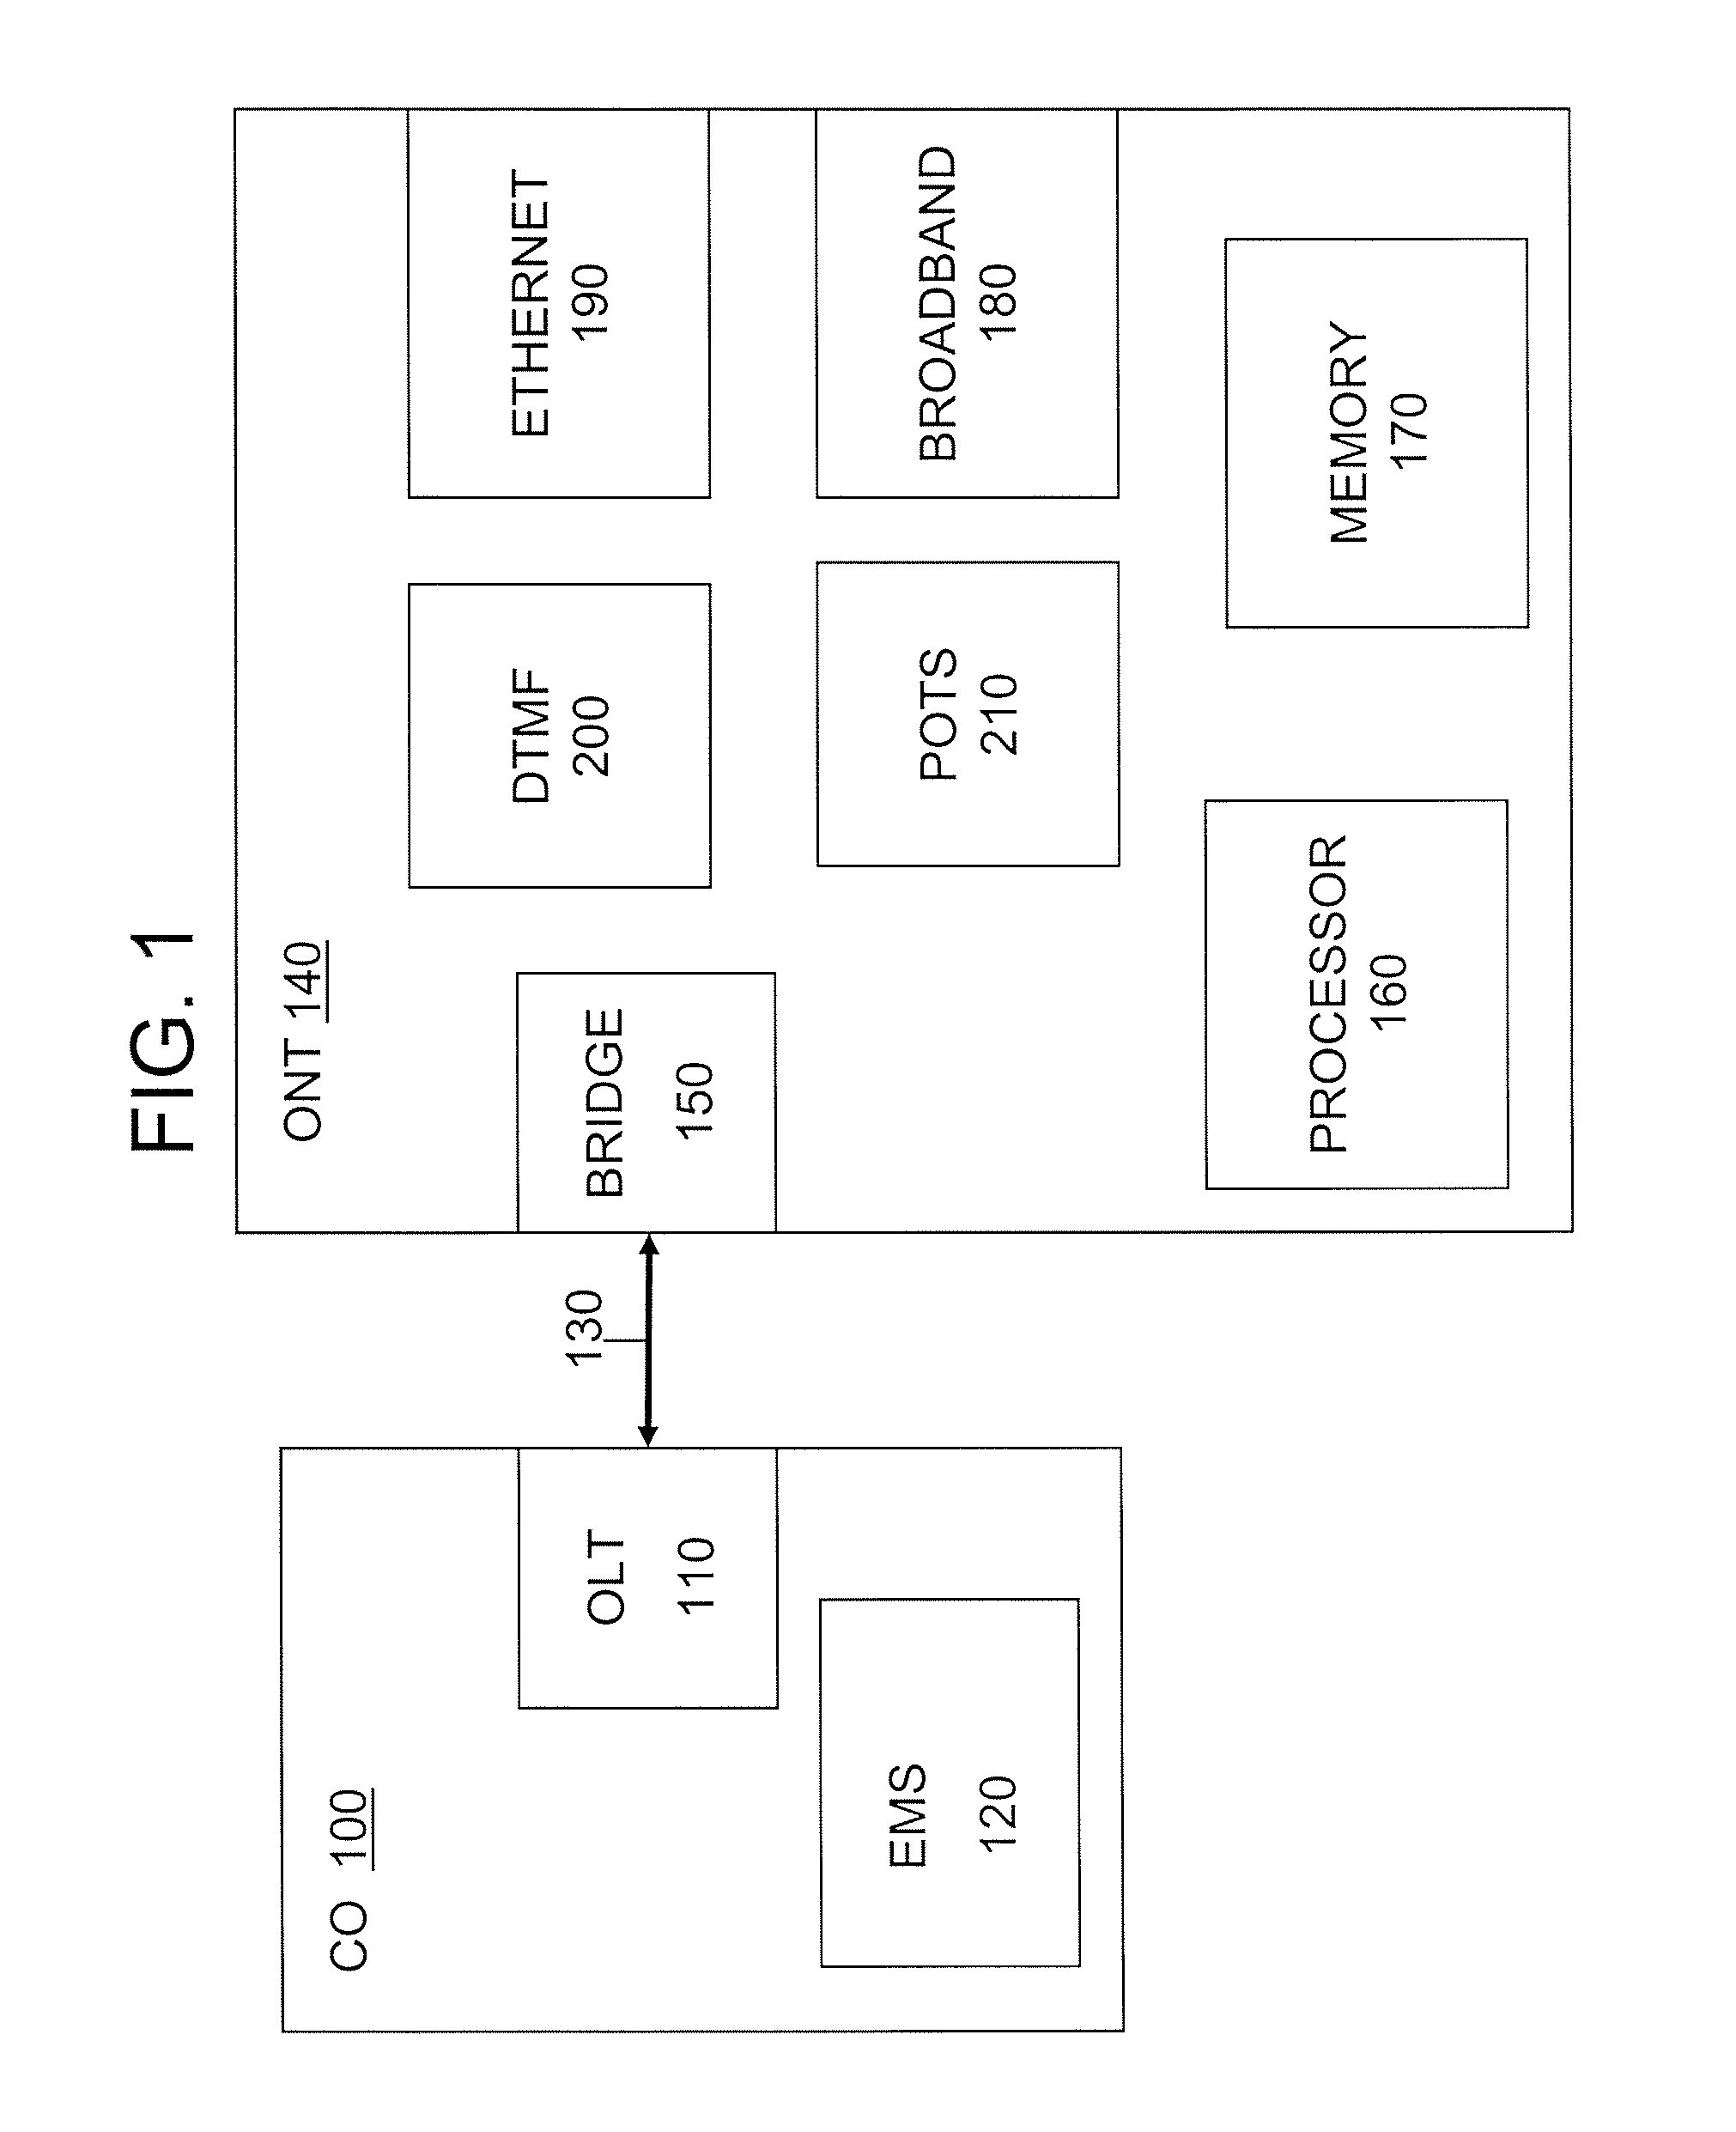 Method of initiating dtmf diagnostics and other features via a call in diagnostics interface